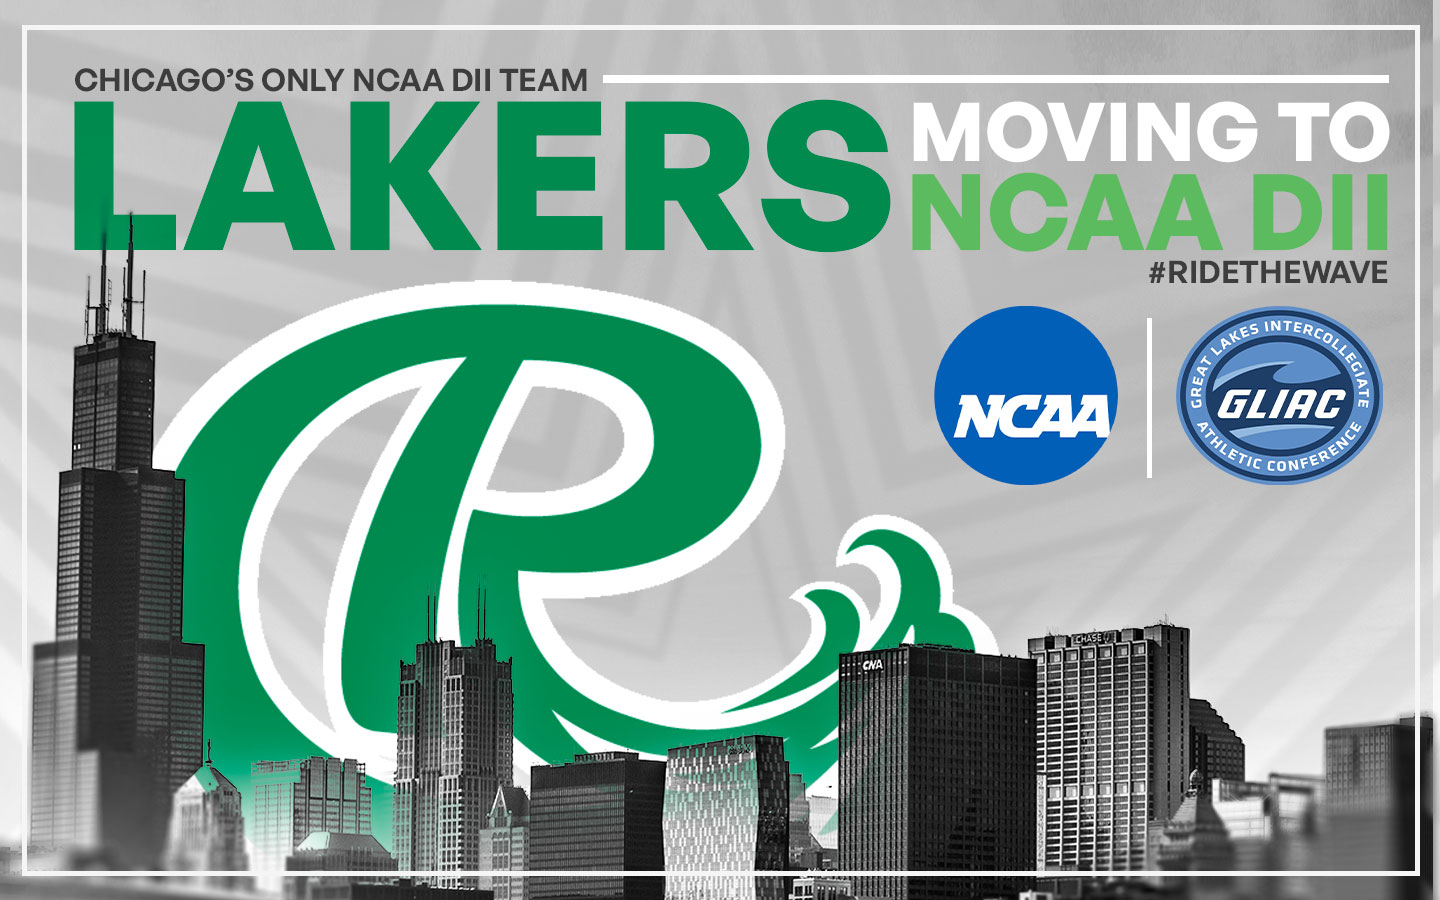 Chicago's Only NCAA DII Team: Lakers moving to NCAA DII #RideTheWave